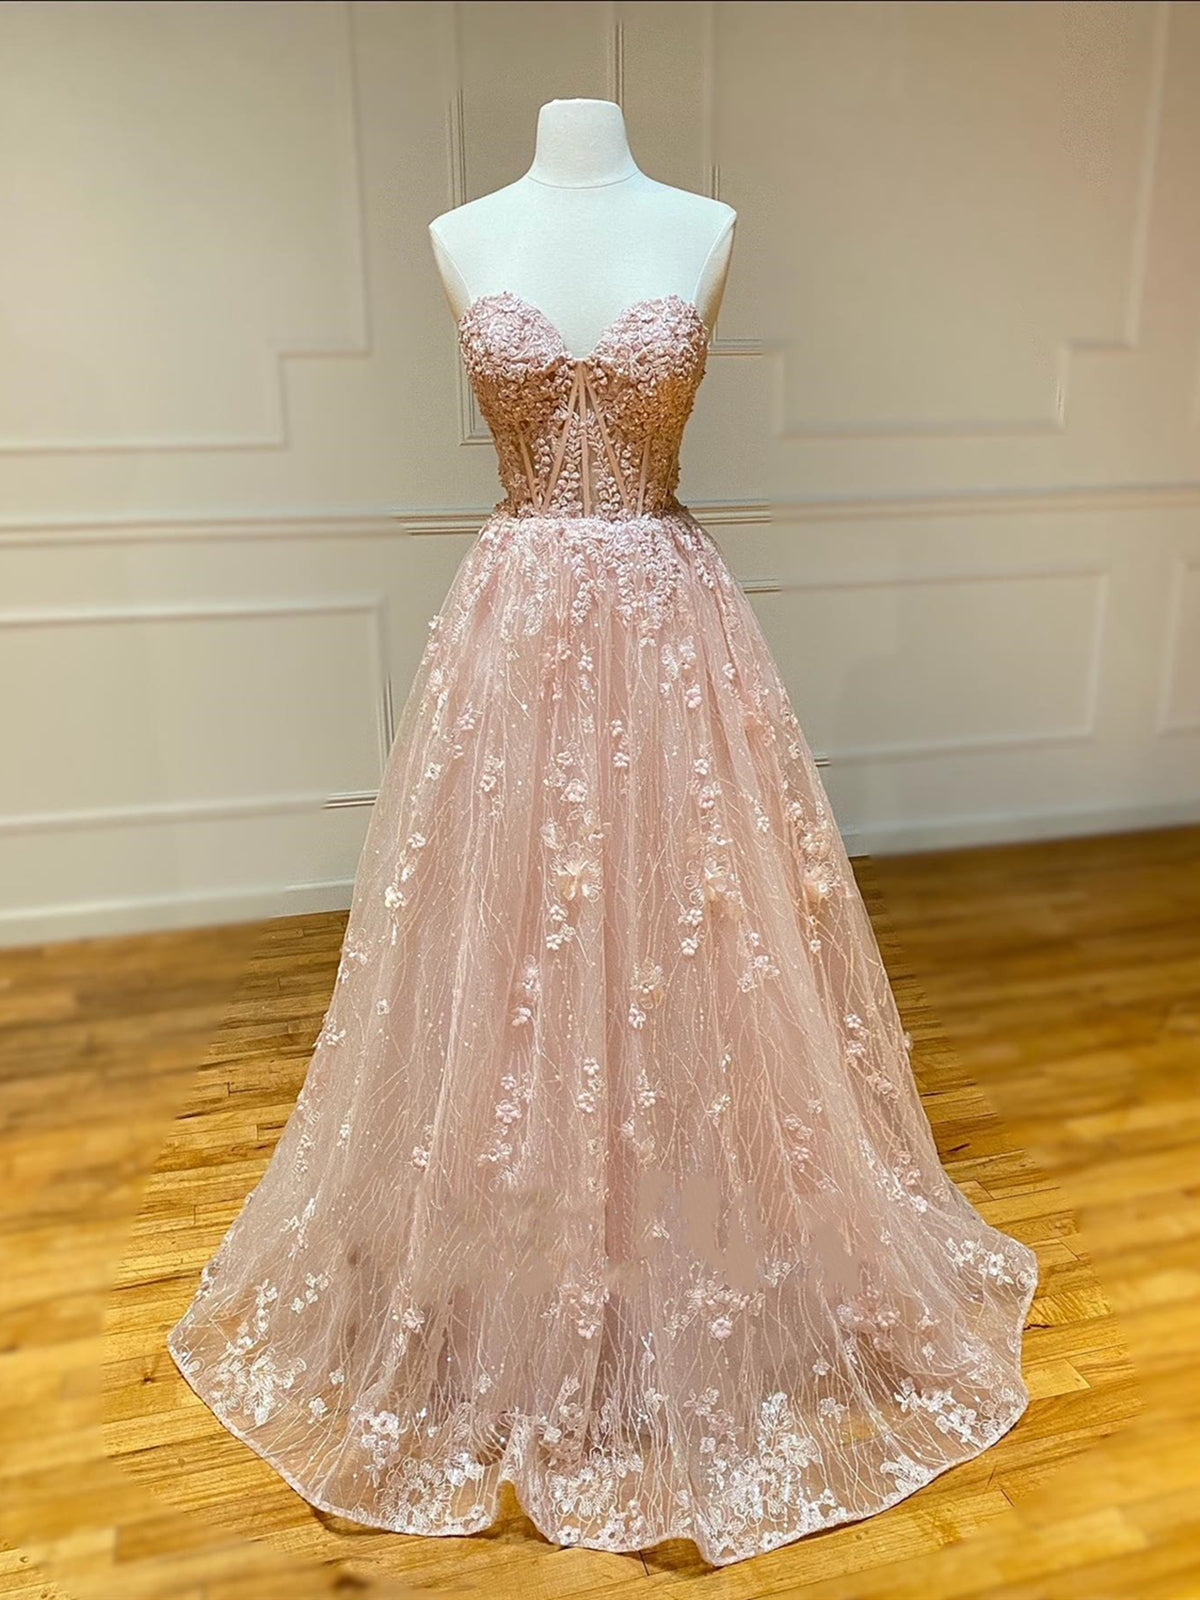 Sweetheart Neck Champagne Lace Prom Dresses For Black girls For Women, Champagne Lace Formal Evening Dresses